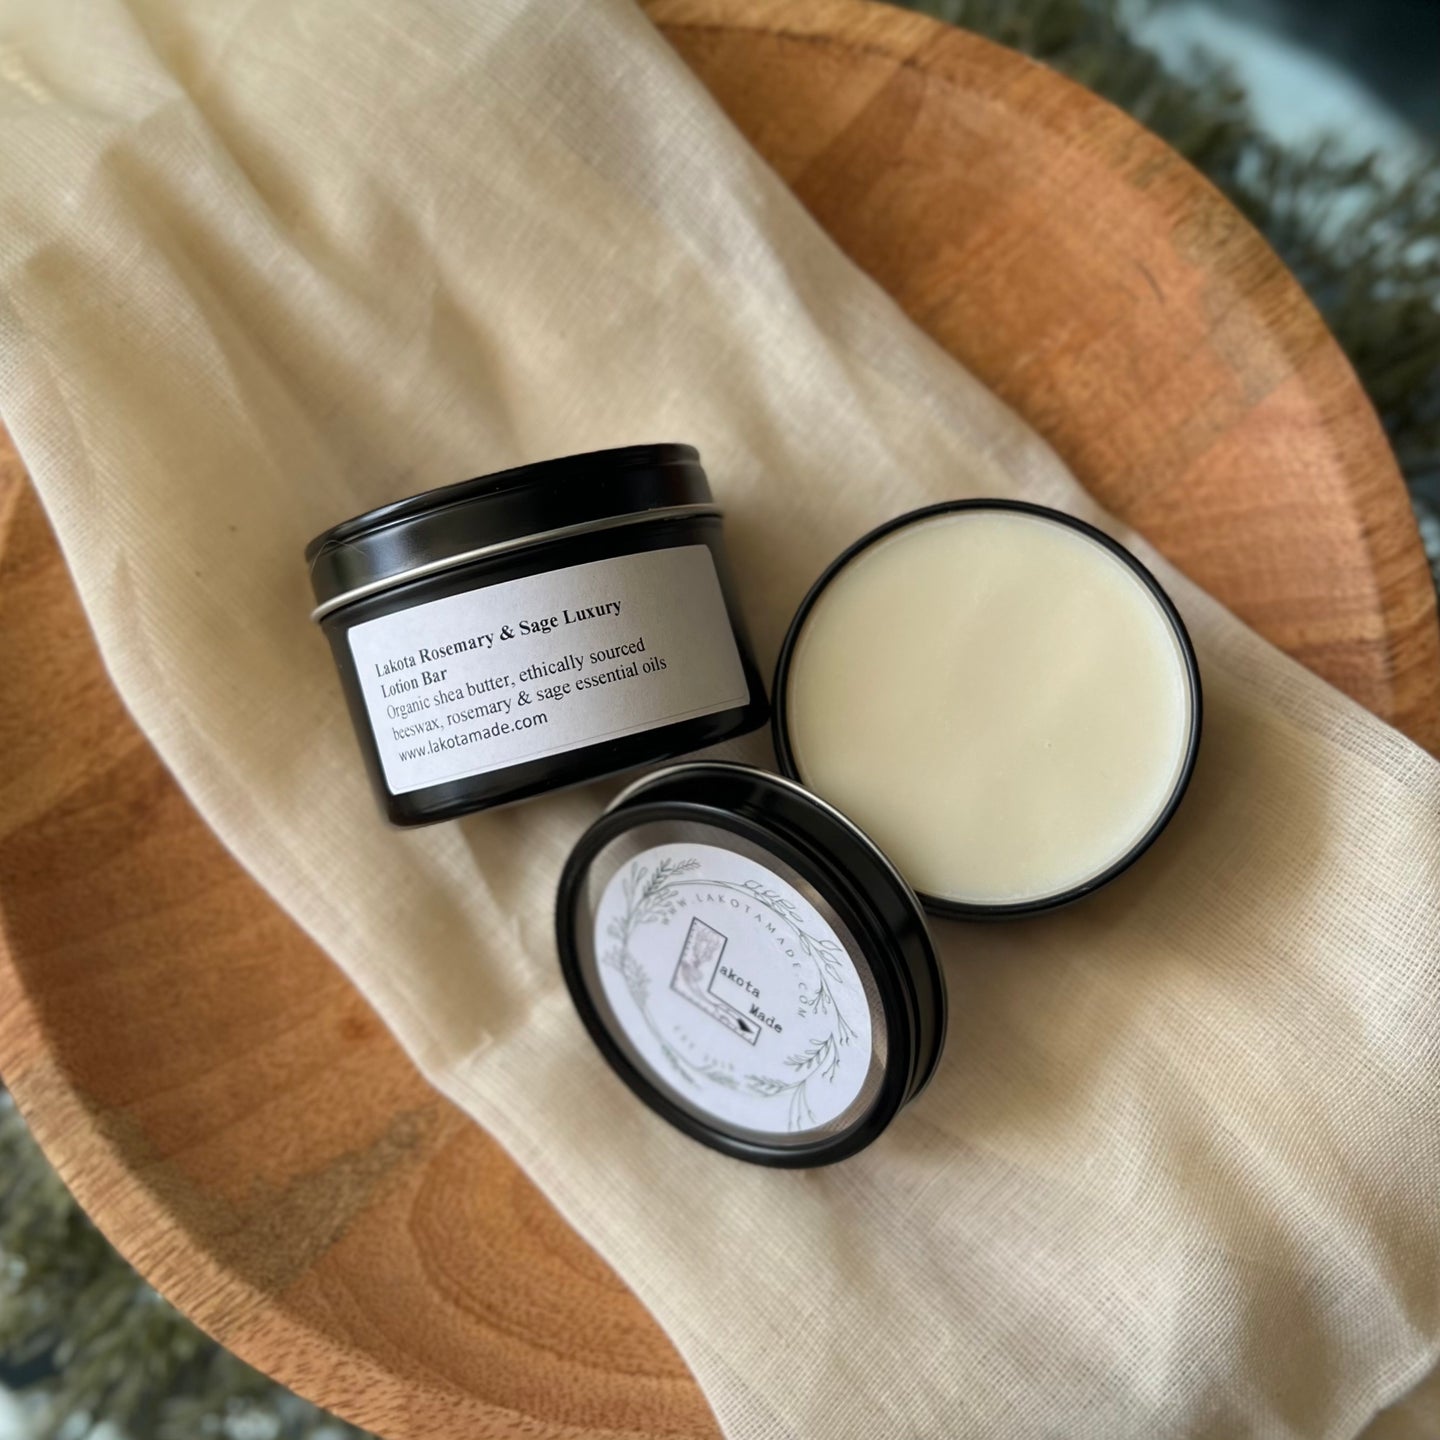 Rosemary & Sage Luxury Solid Lotion